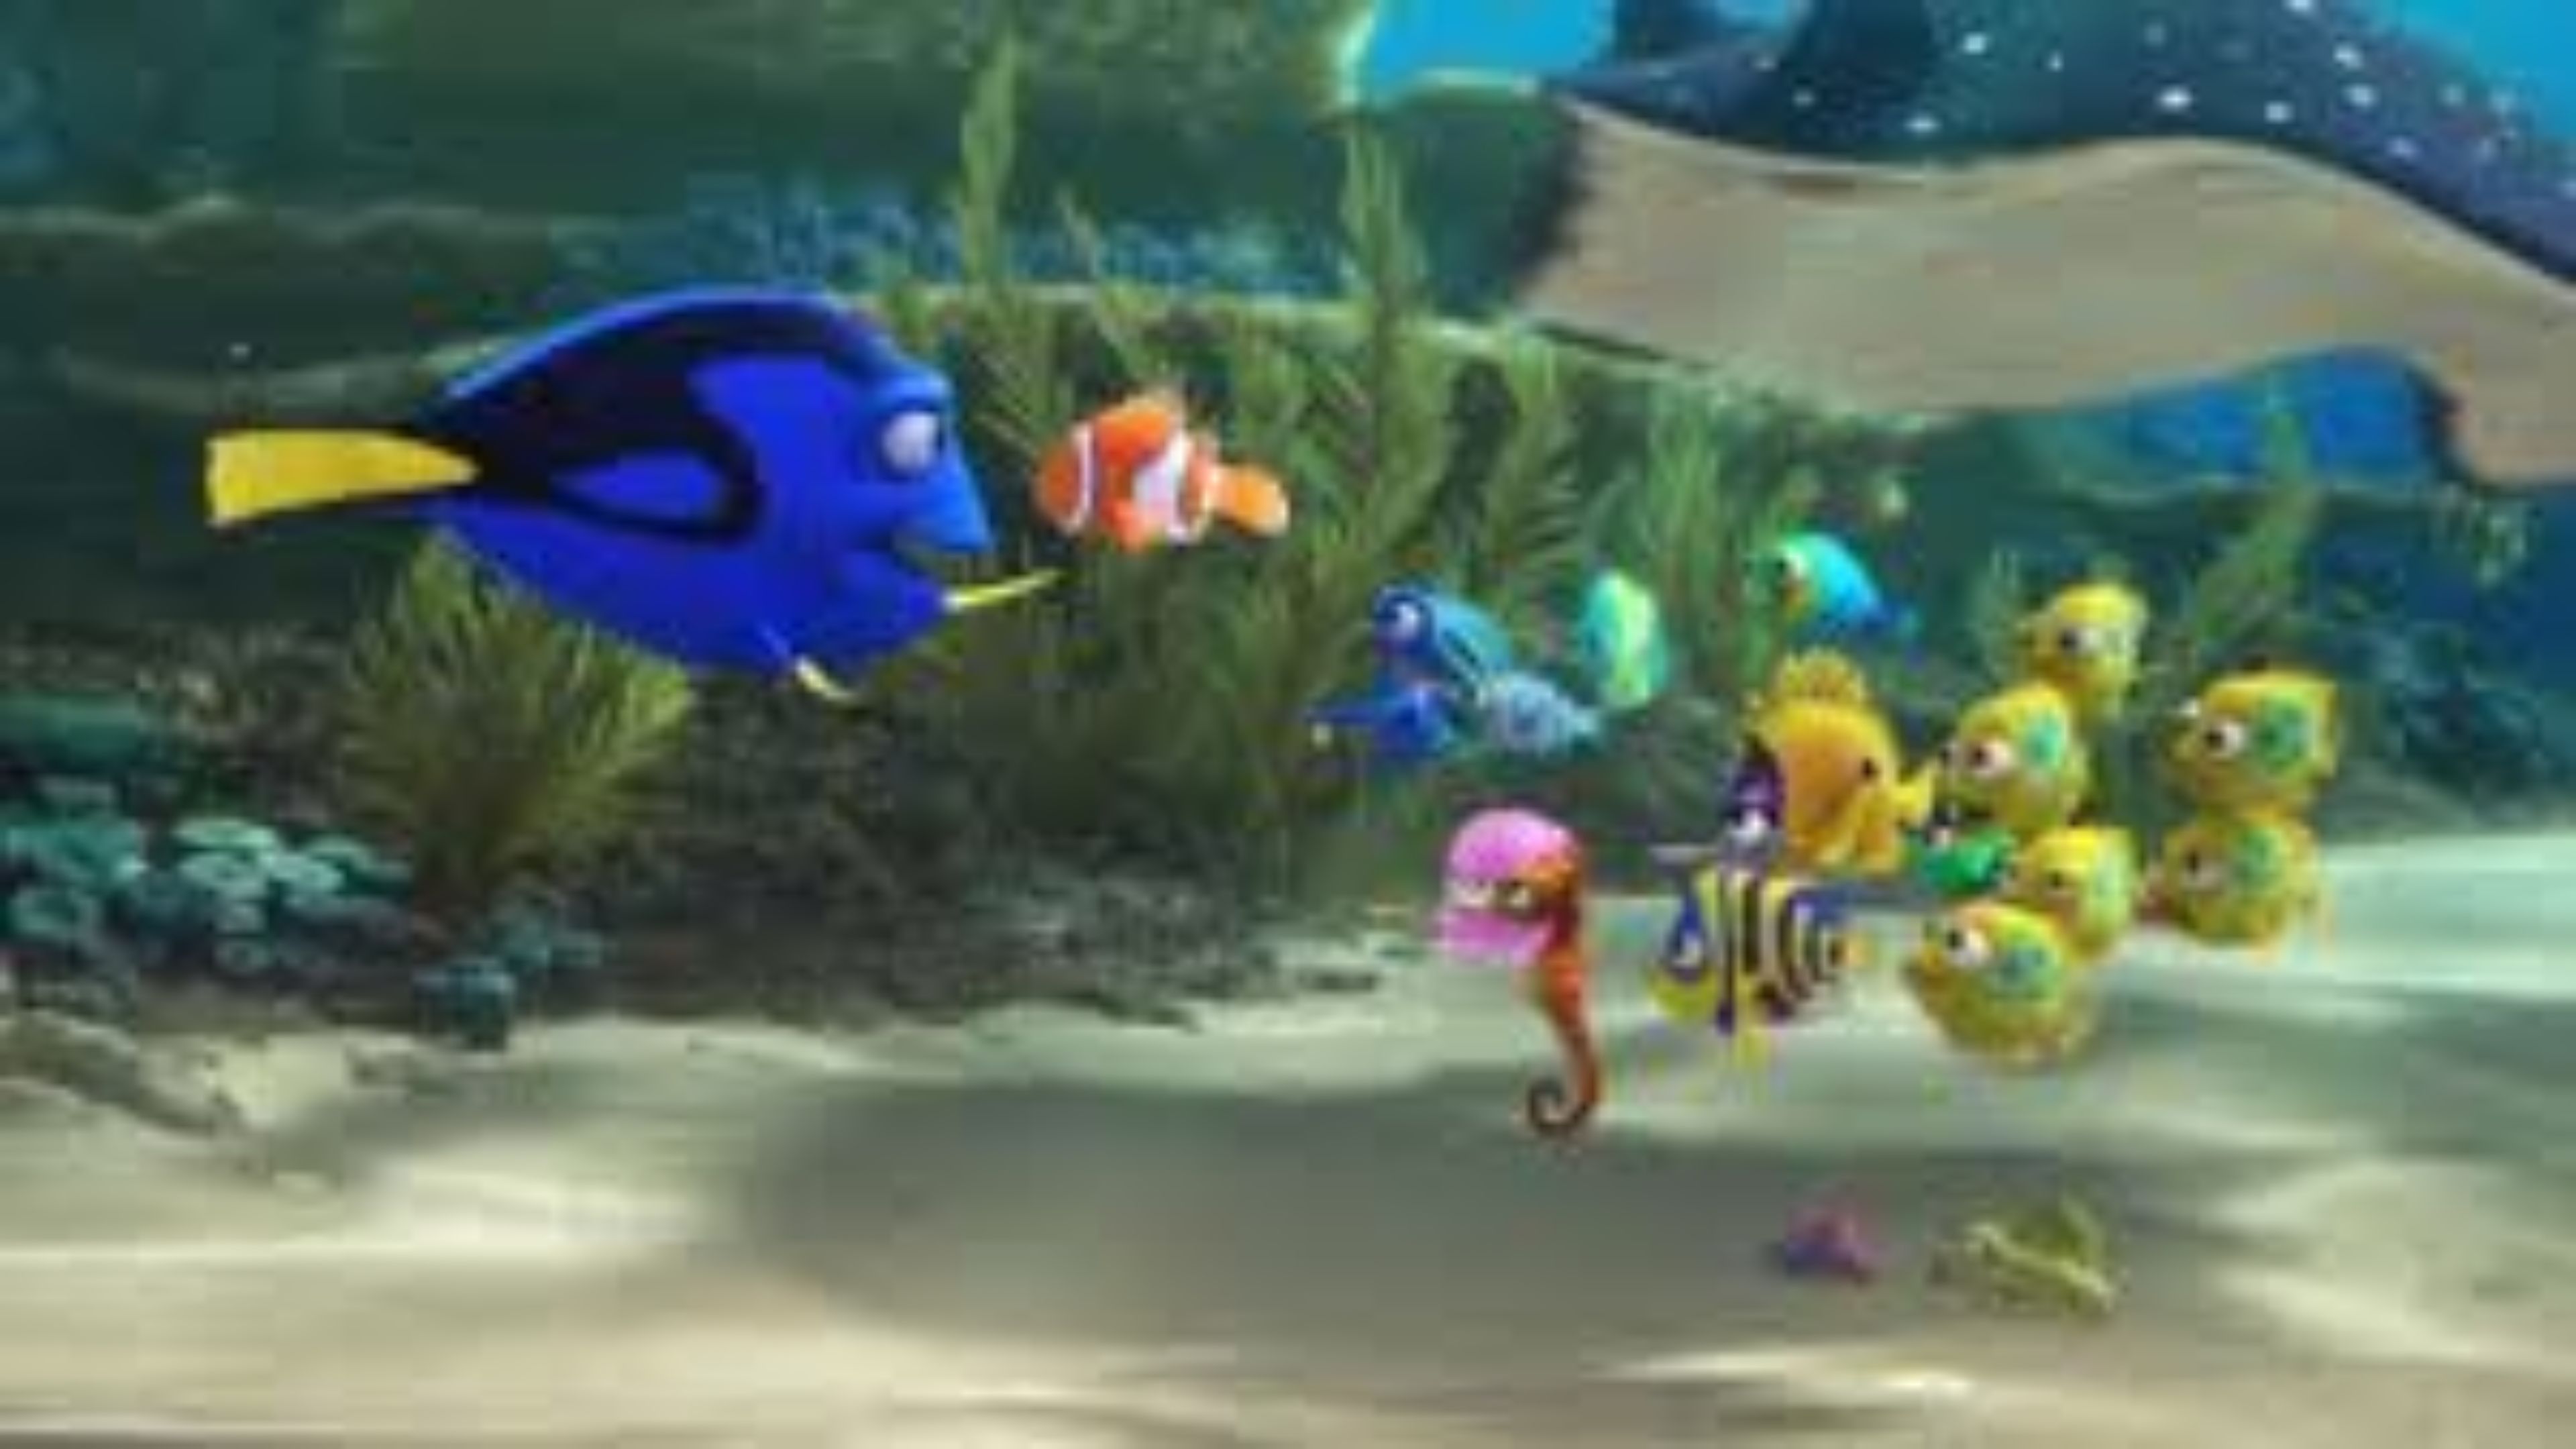 527757 7980x6000 High Resolution Wallpaper finding dory  Rare Gallery HD  Wallpapers